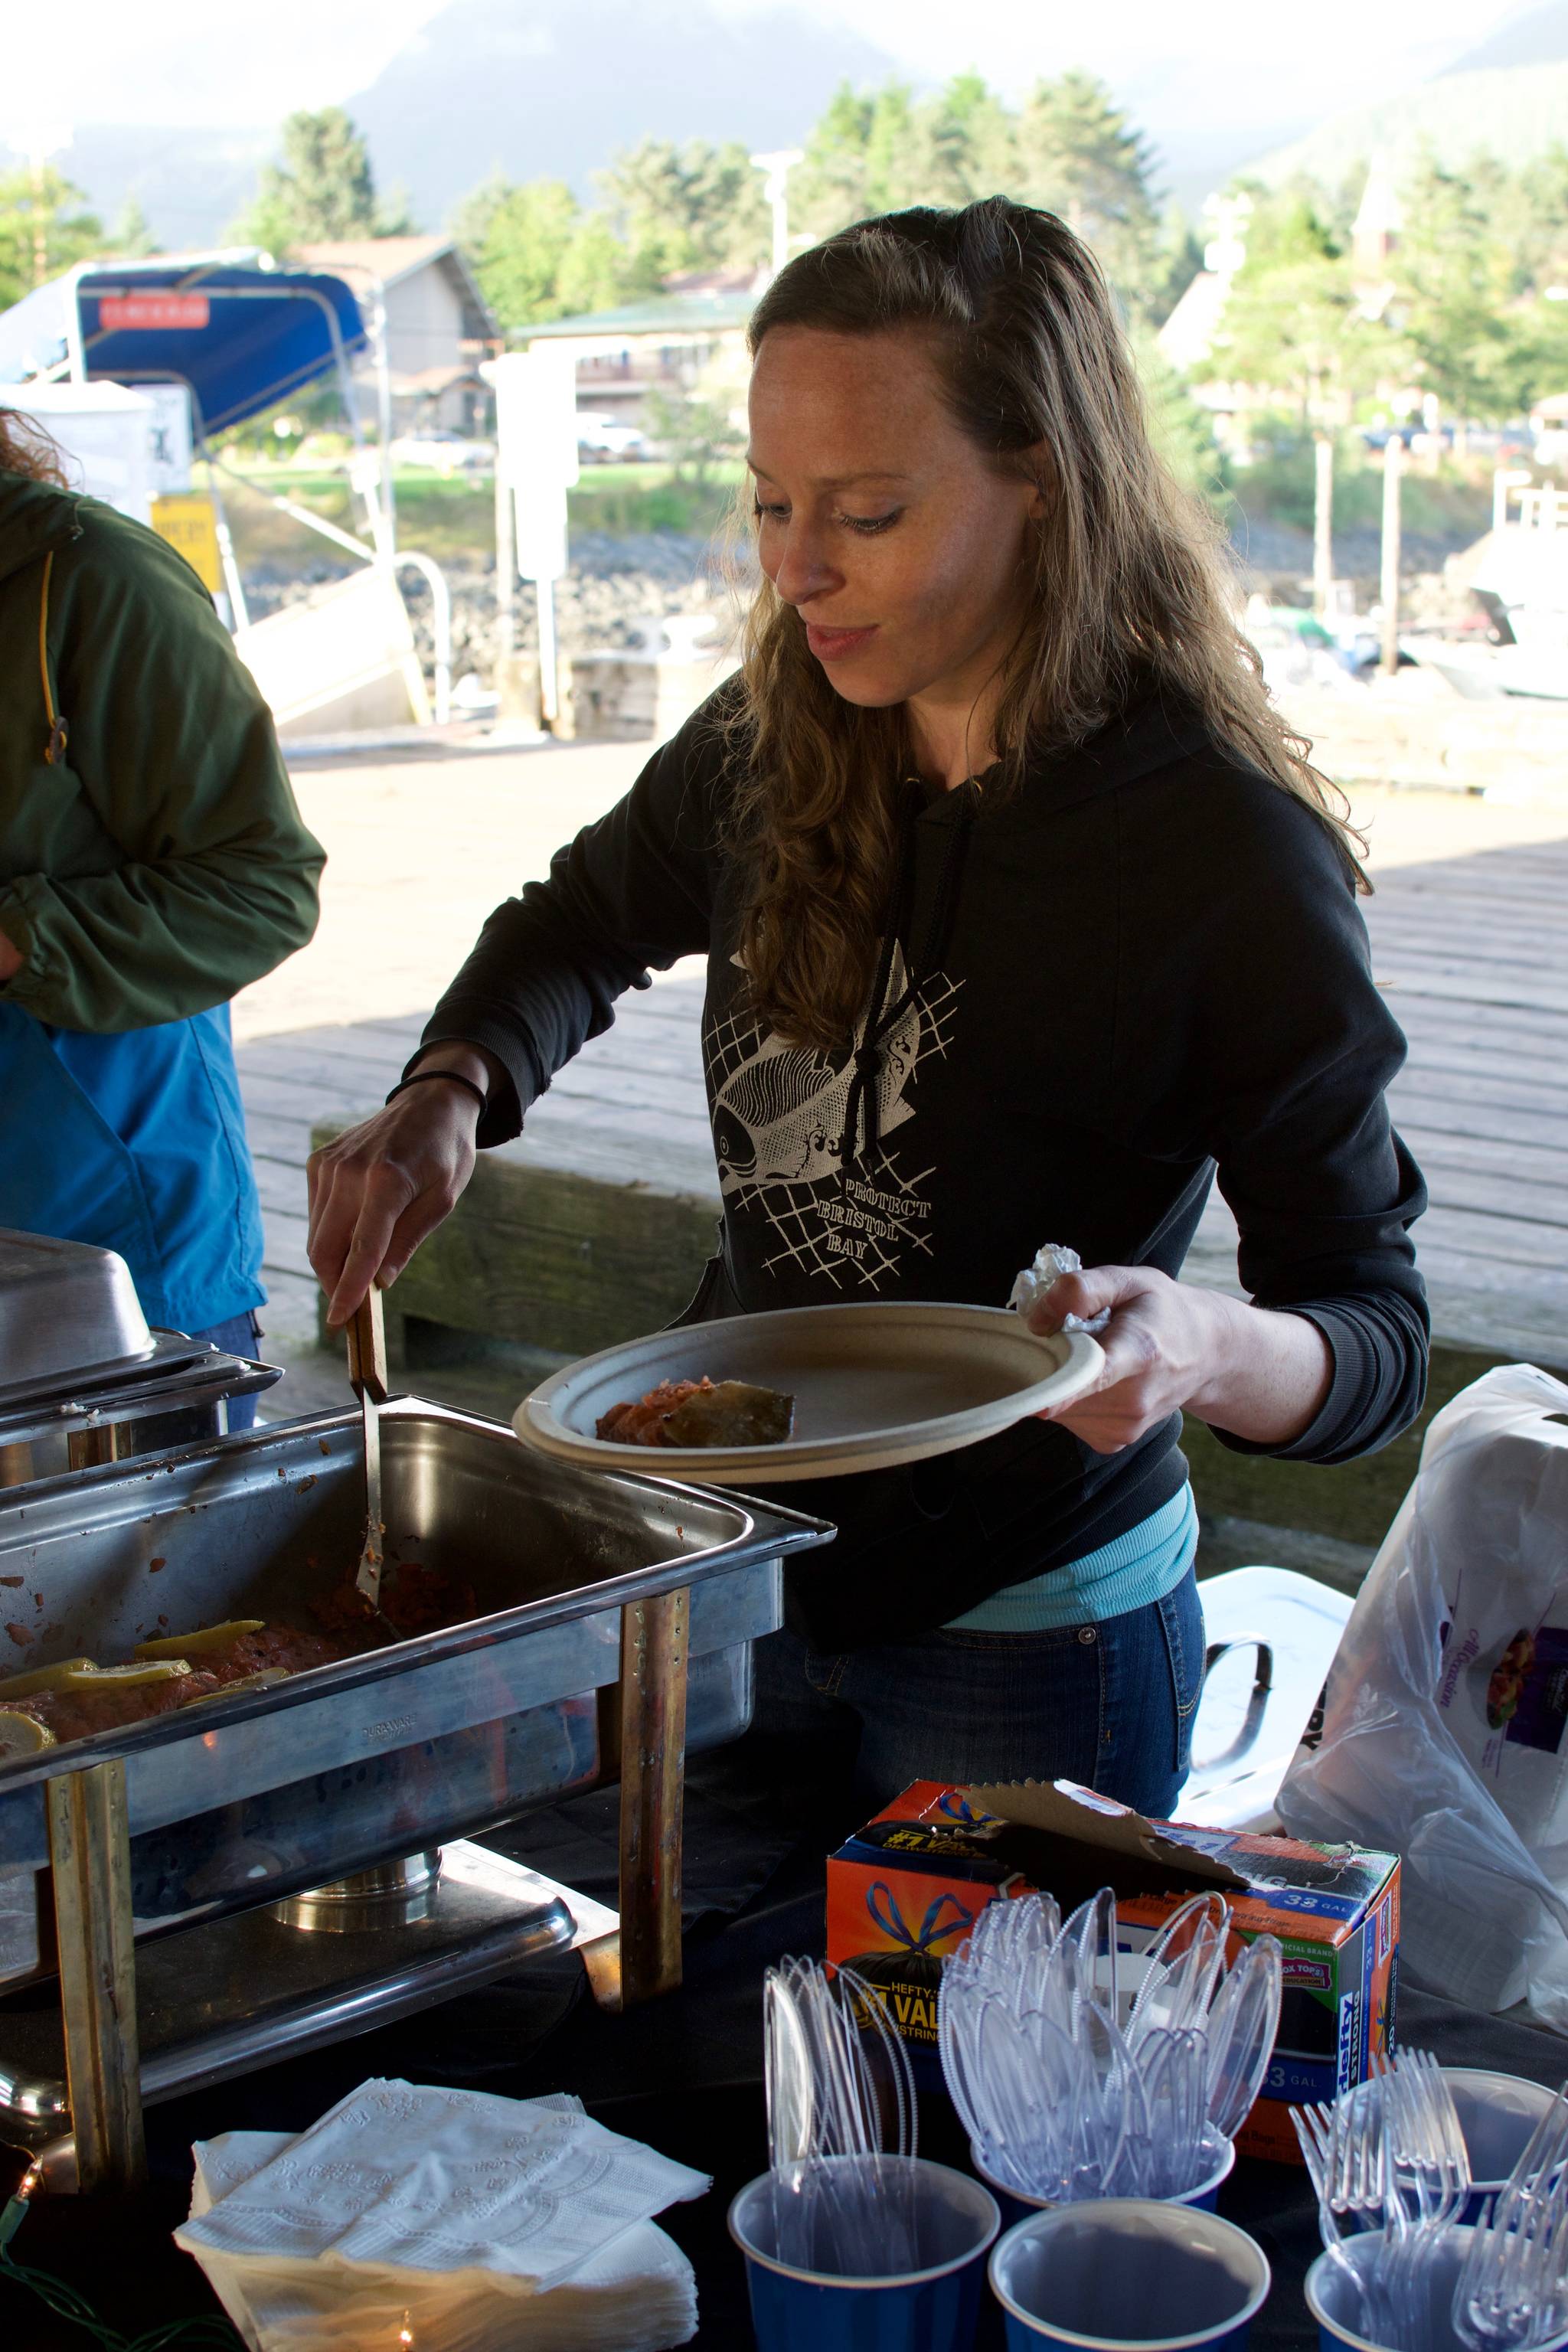 Aurora Lang serves freshly grilled salmon to an attendee at the Sitka Seafood Festival.